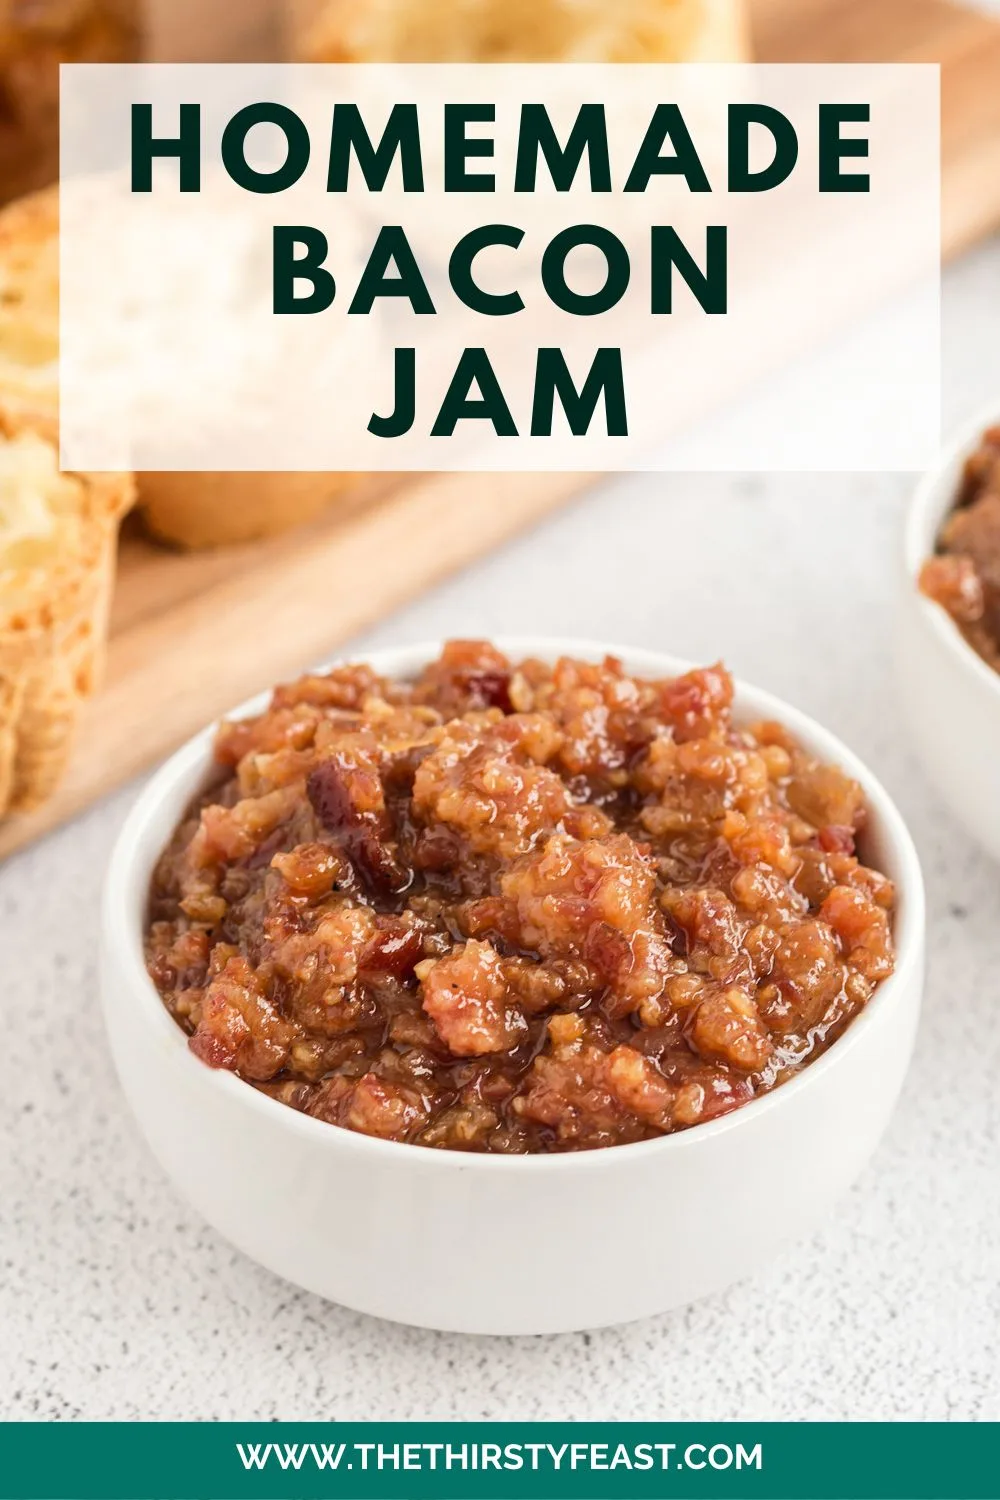 homemade bacon jam Pinterest image. bacon jam is in a white bowl with a caption in black text that reads "homemade bacon jam"